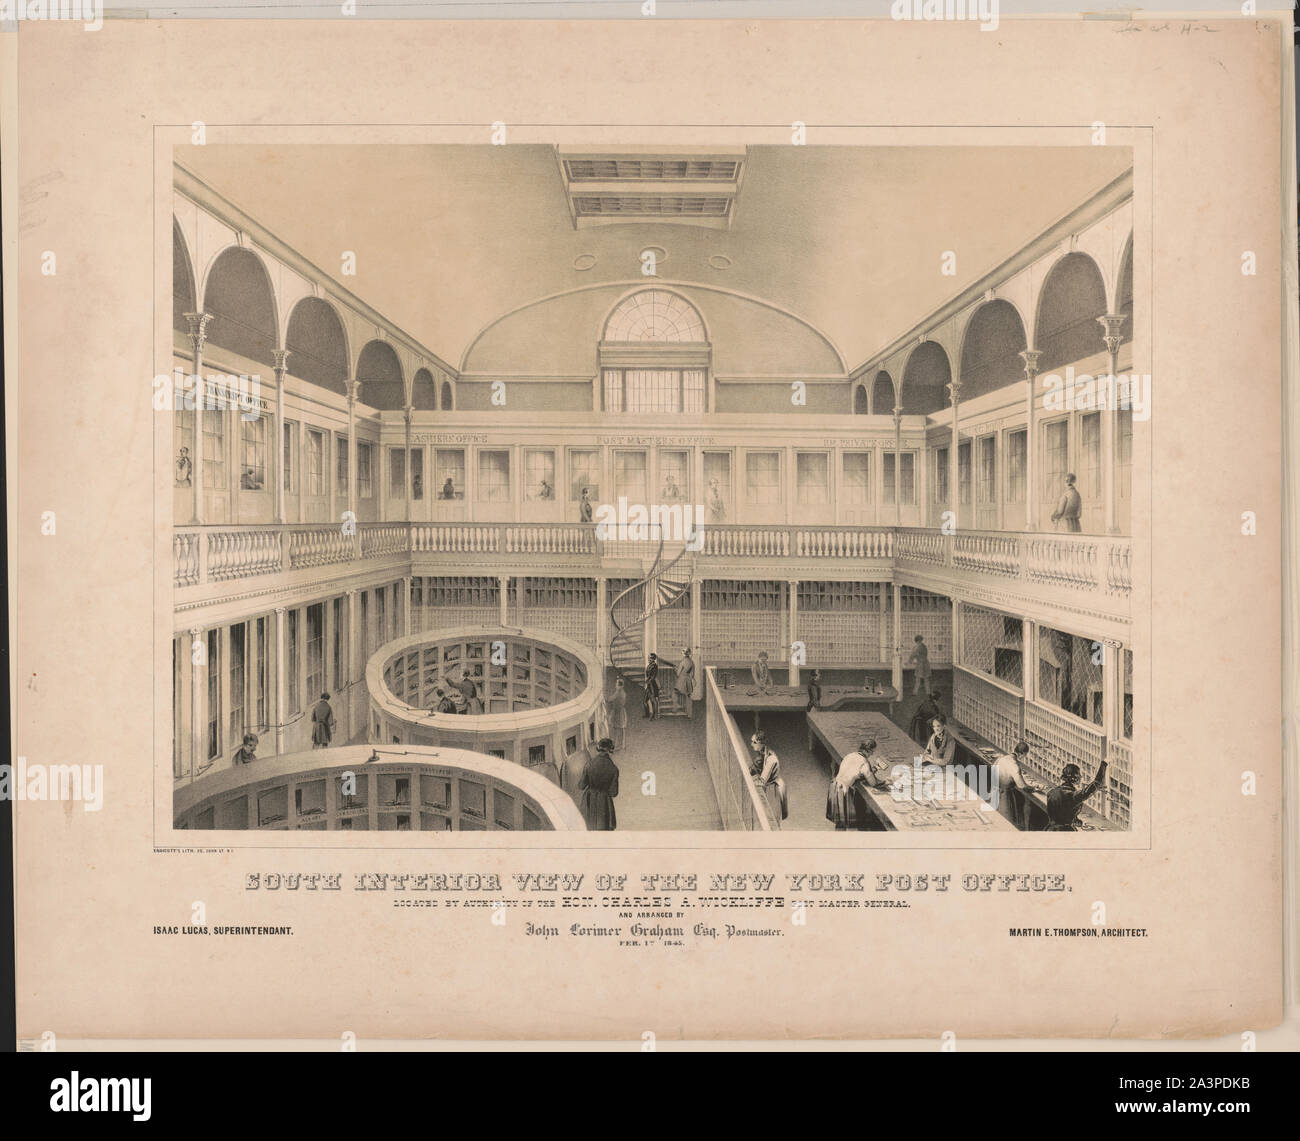 South interior view of the New York post office, located by authority of the Hon. Charles A. Wickliffe Post Master General, and arranged by John Lorimer Graham Esq. Postmaster. Fer. 1st 1845 Stock Photo